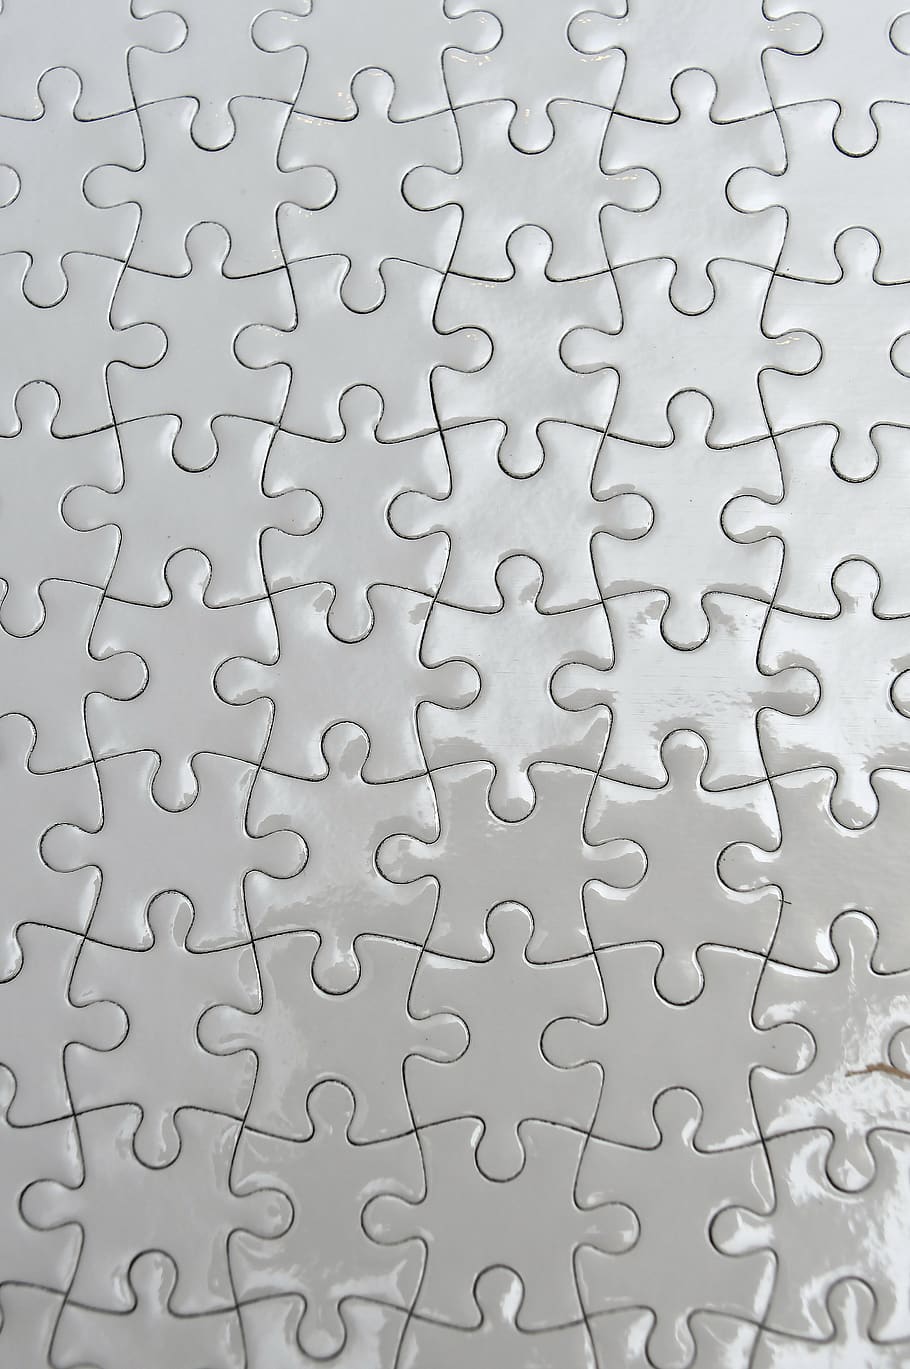 puzzle, paper, design, game, sample, print, games, pattern, jigsaw piece, jigsaw puzzle